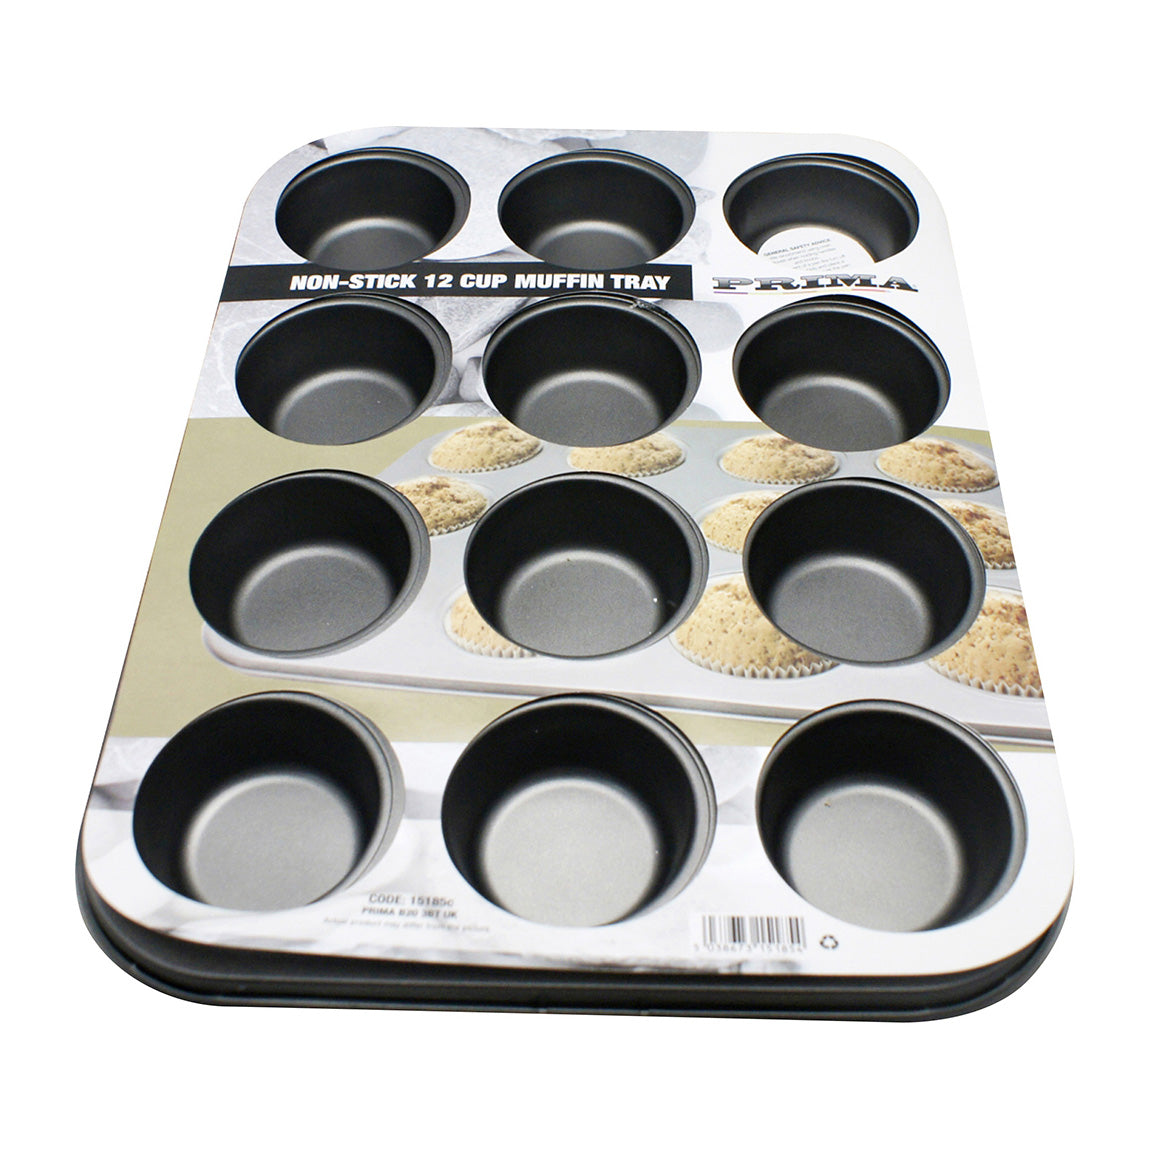 12 Cup Tray for Baking Muffins and Other Treats